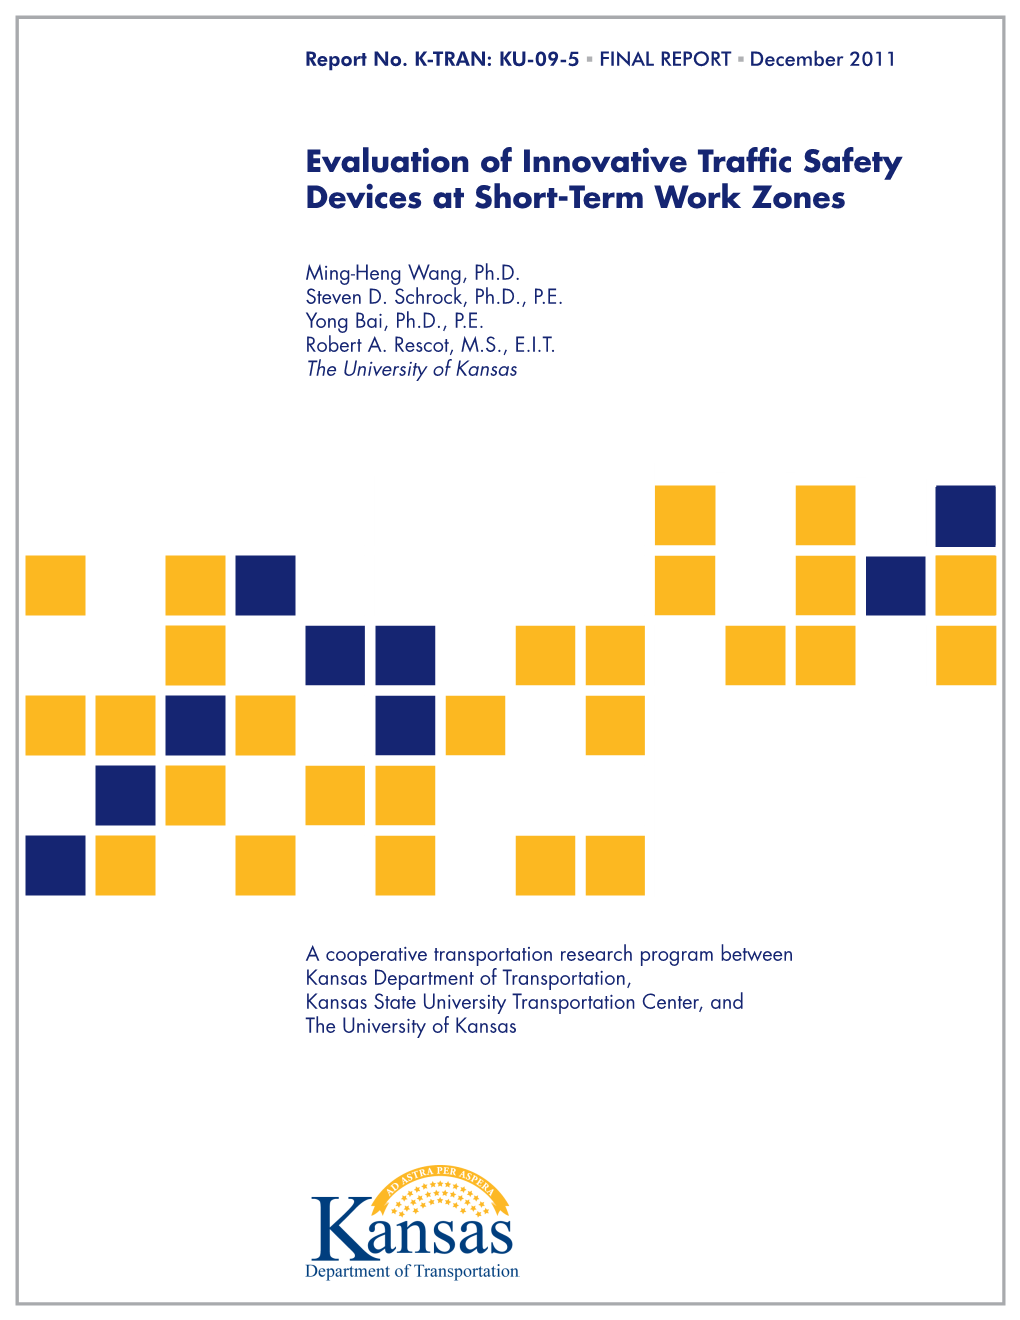 Evaluation of Innovative Traffic Safety Devices at Short-Term Work Zones